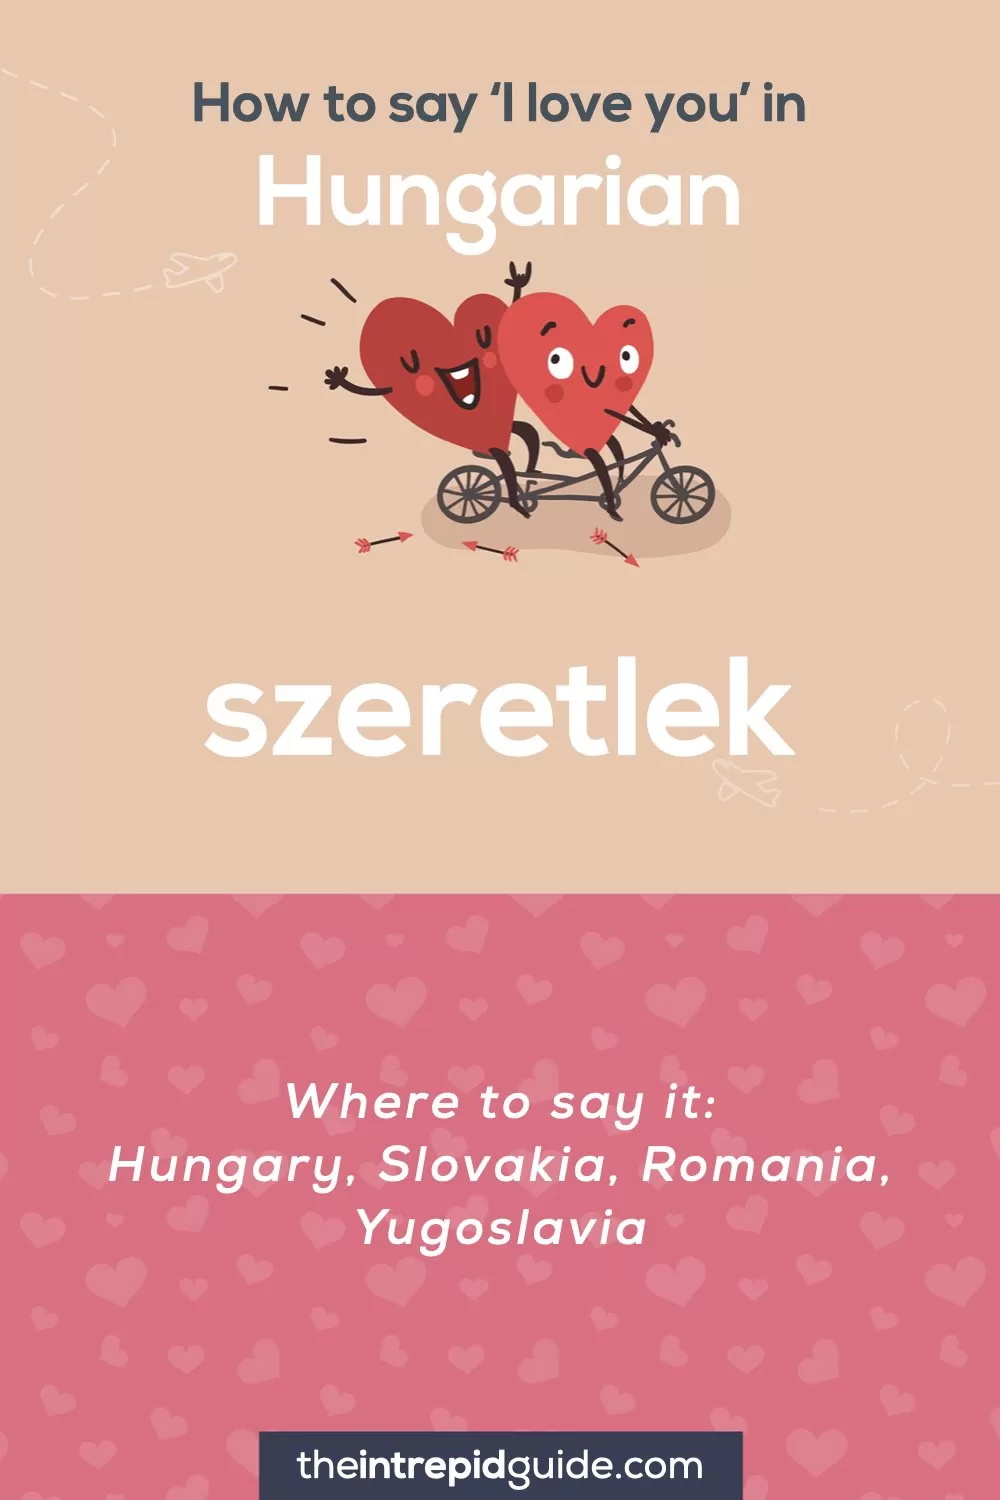 How to say I love you in different languages - Hungarian - szeretlek